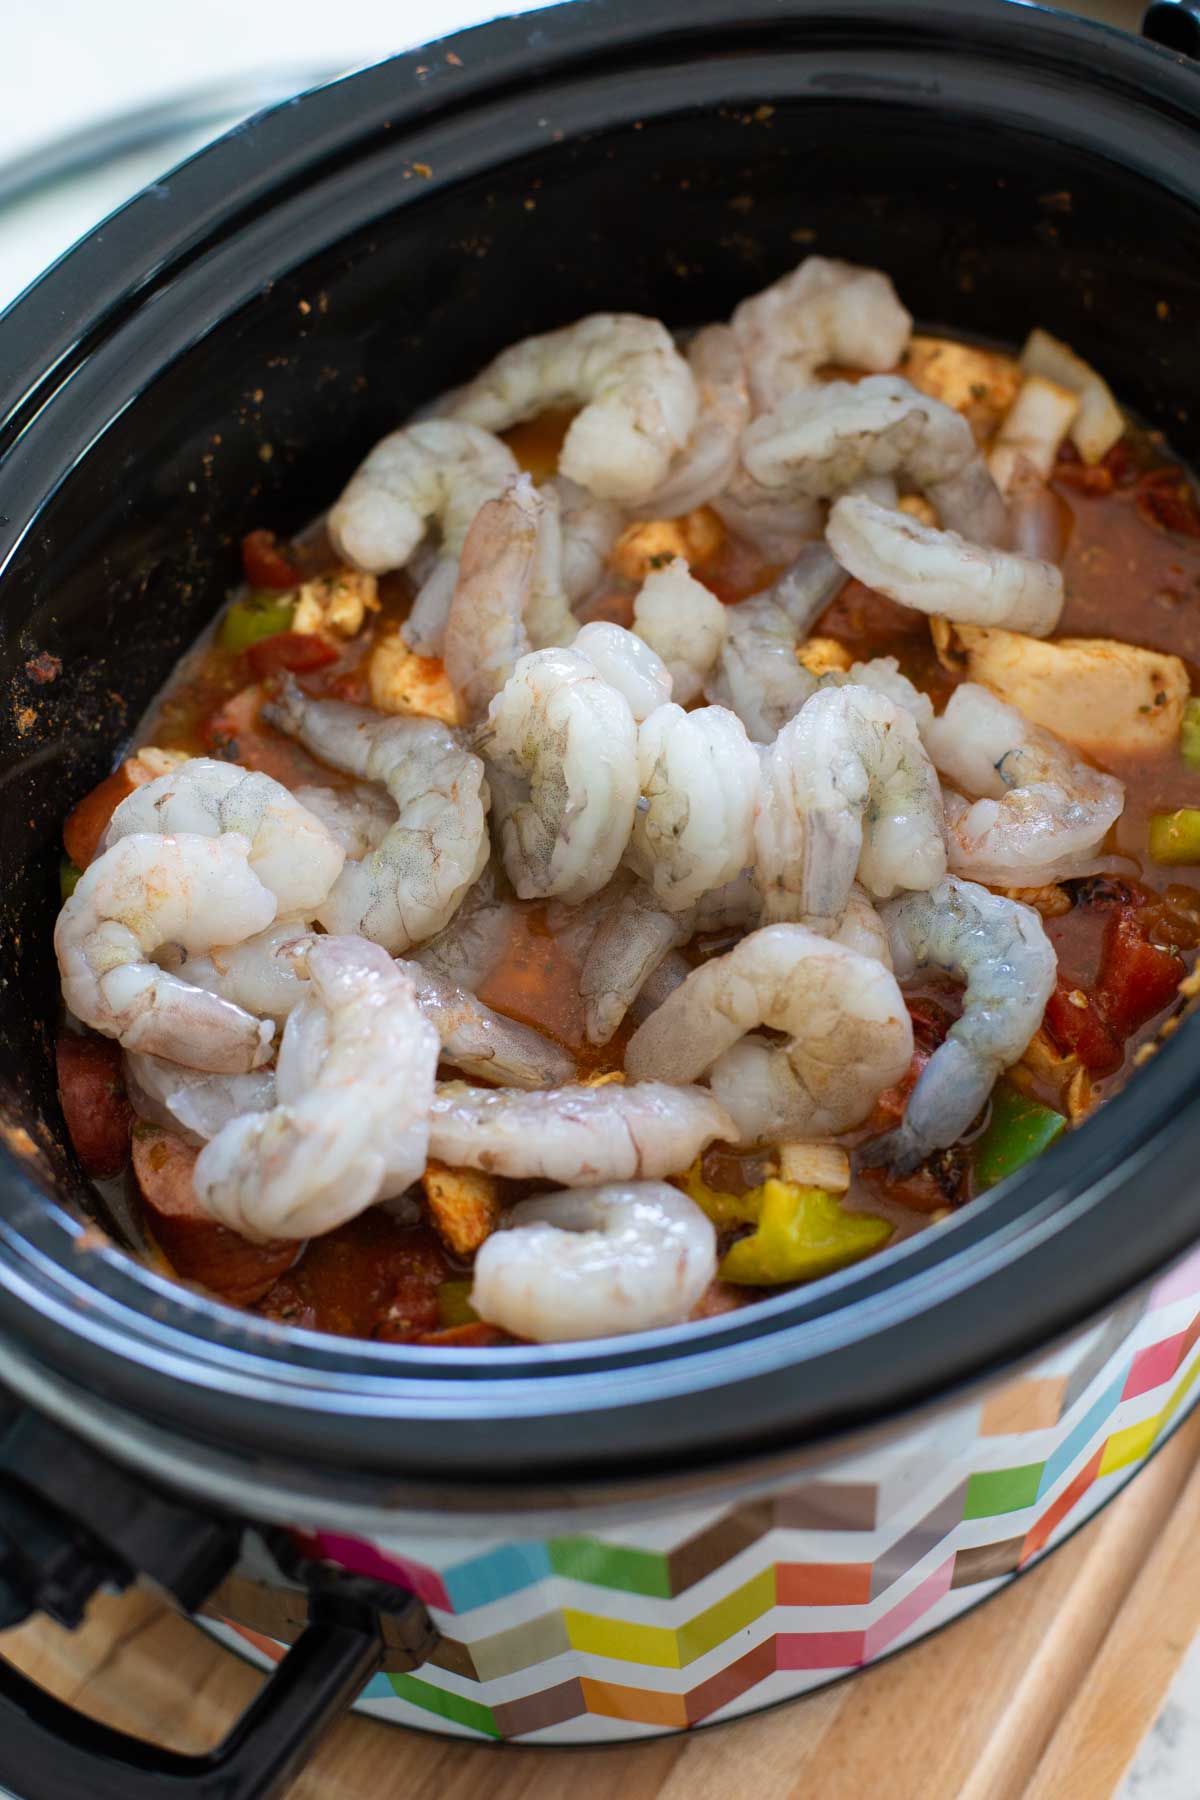 The shrimp are added to the slowcooker last since they cook quickly.